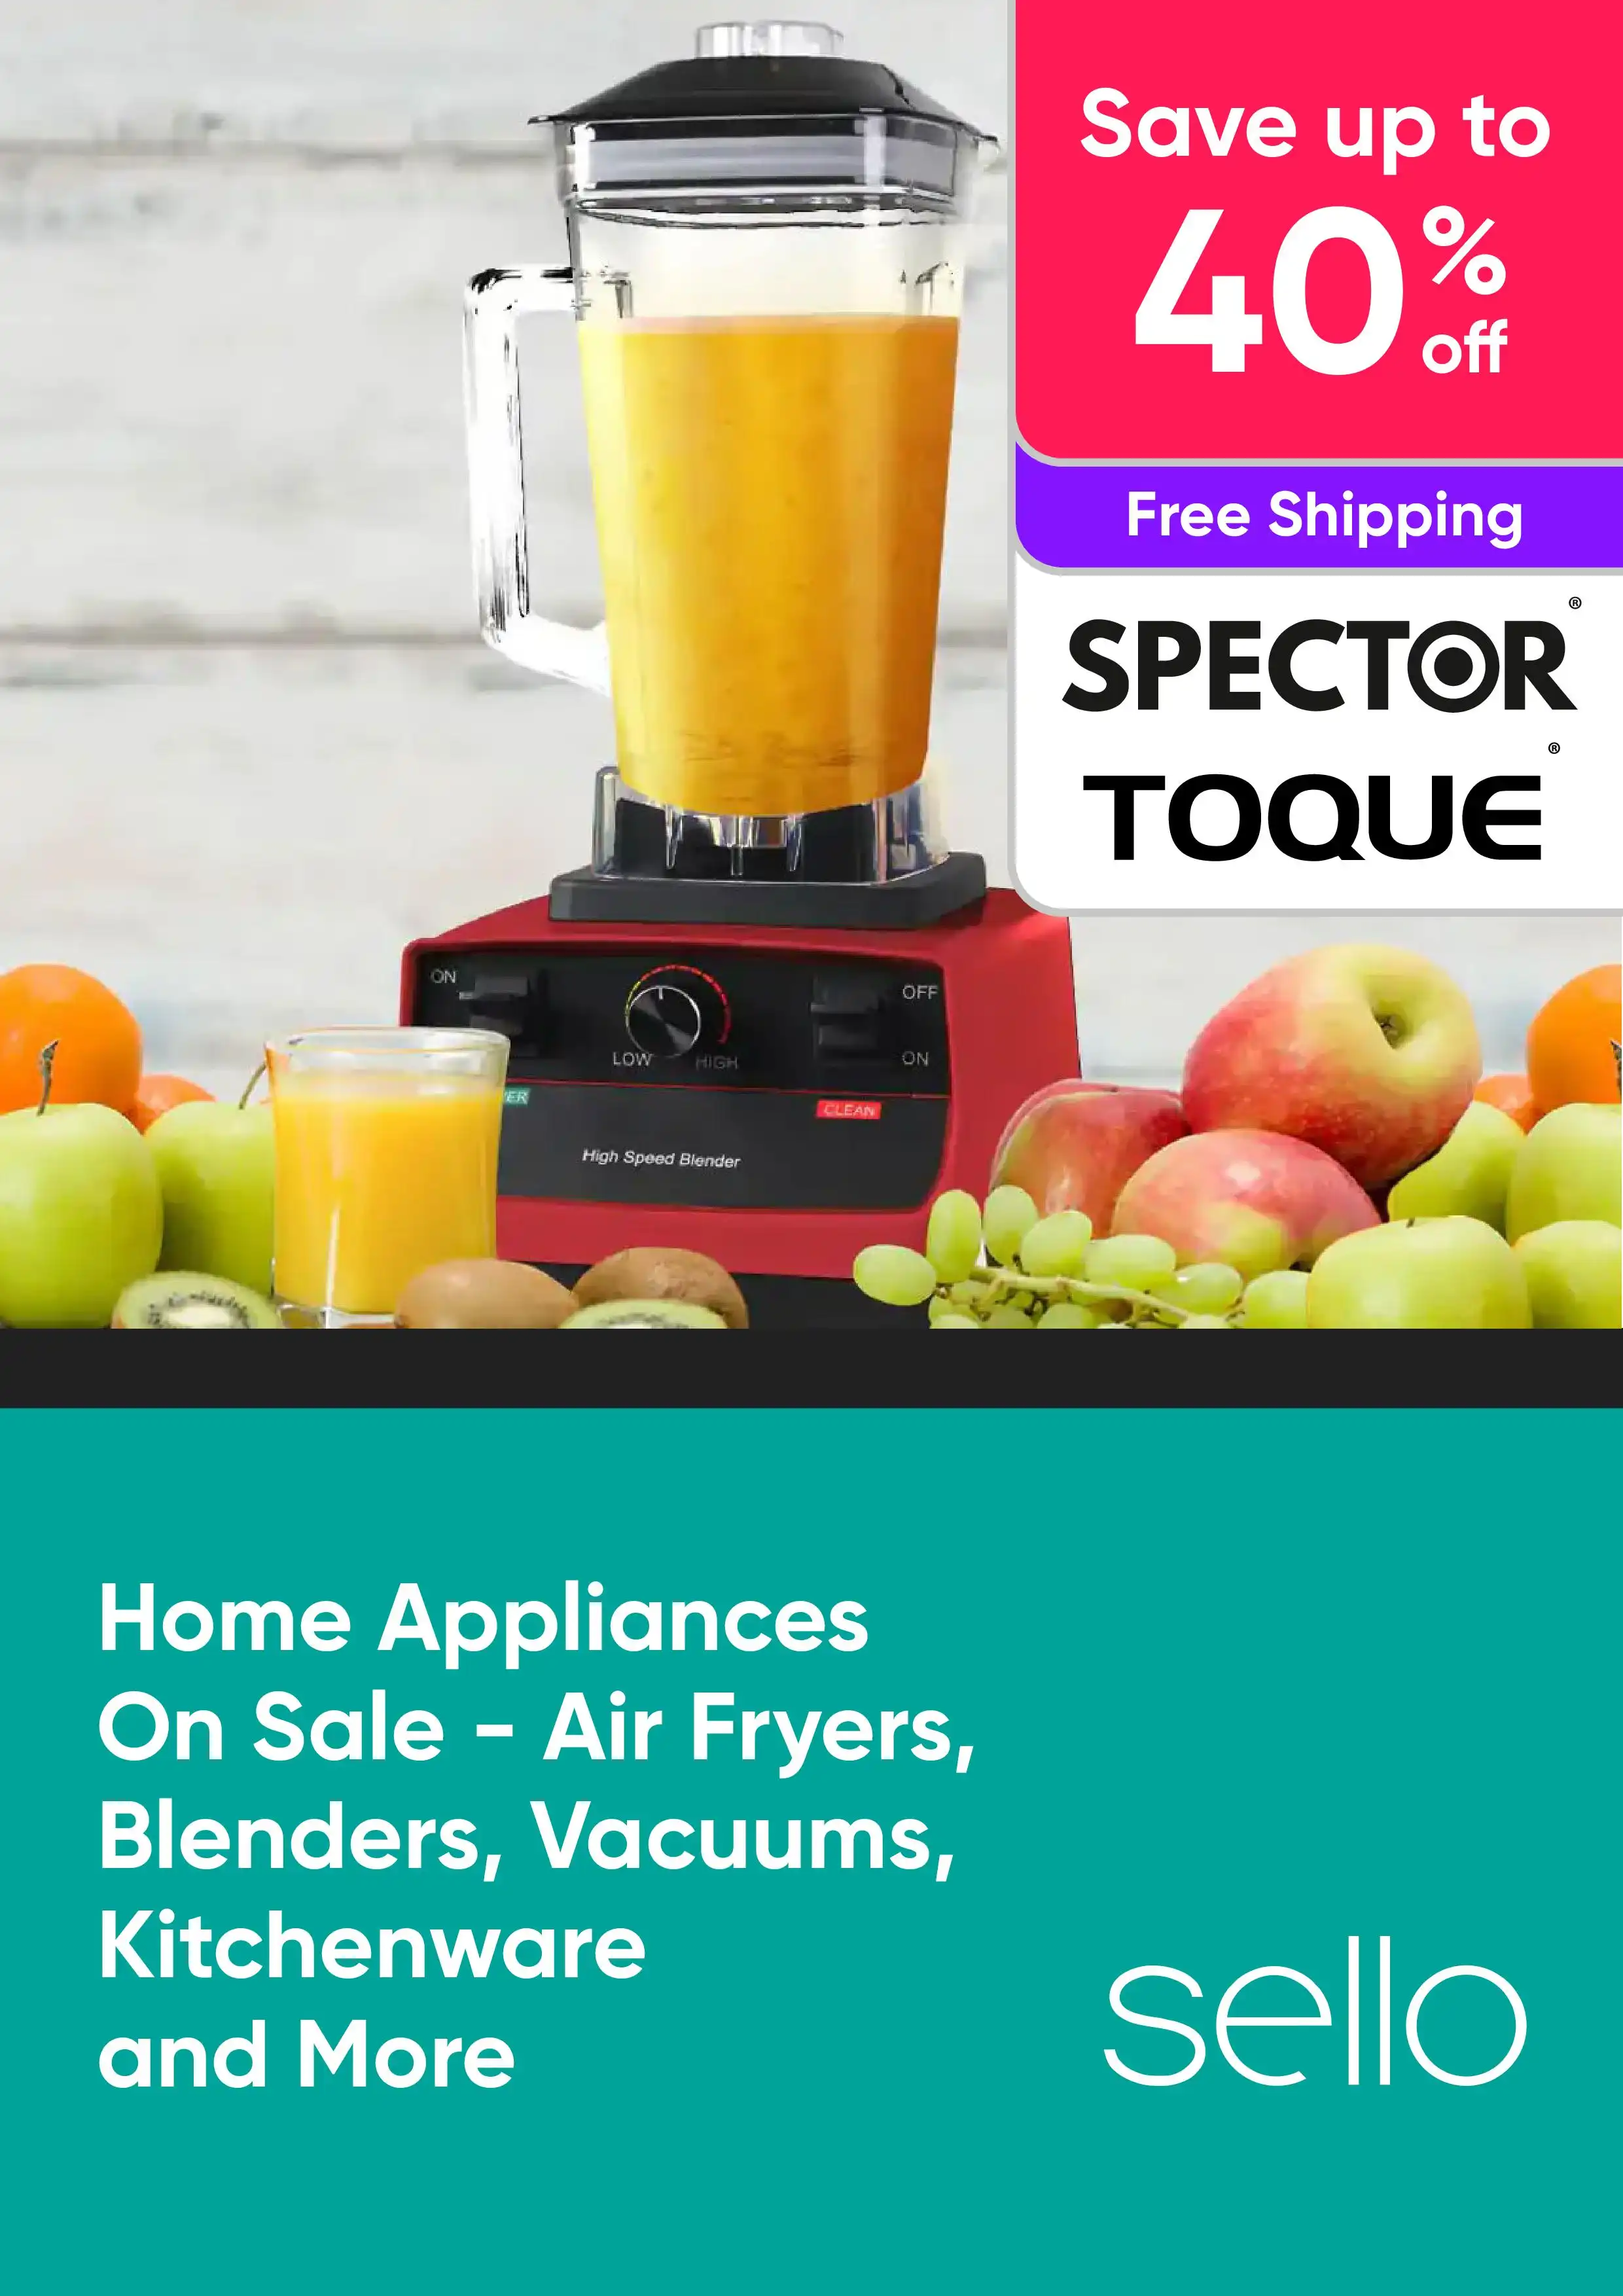 Home Appliances On Sale - Rice Cookers, Blenders, Vacuums, Kitchenware and More - Spector, Toque - Up to 40% Off